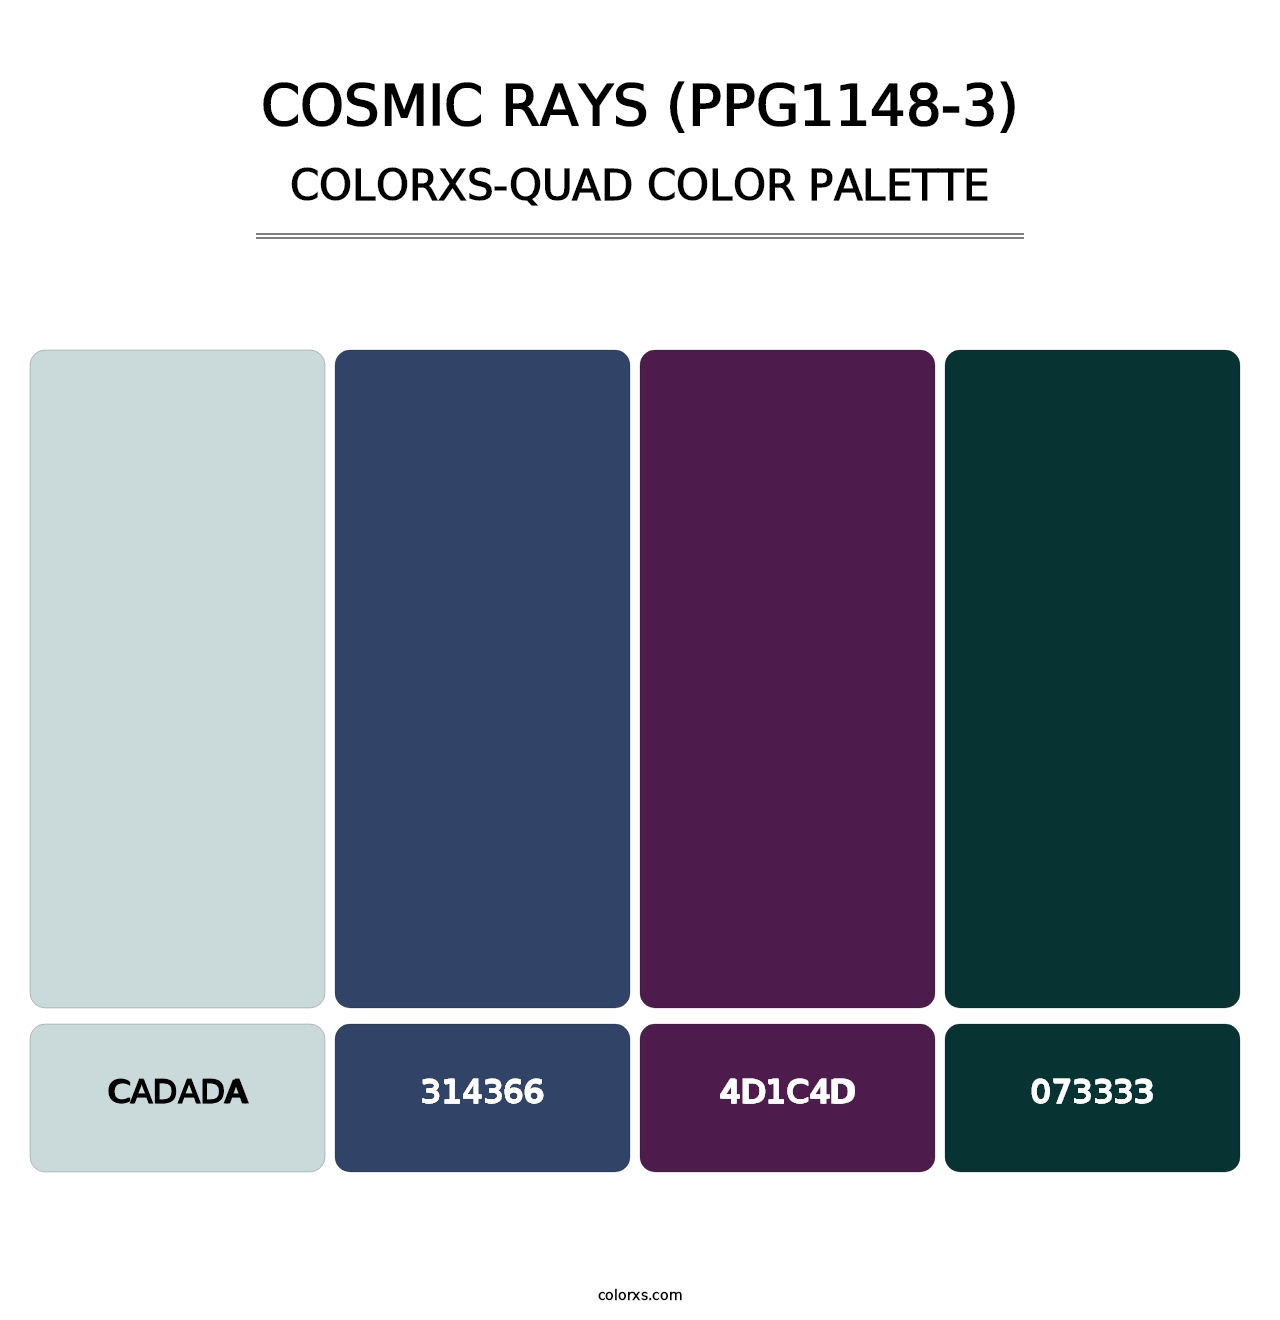 Cosmic Rays (PPG1148-3) - Colorxs Quad Palette